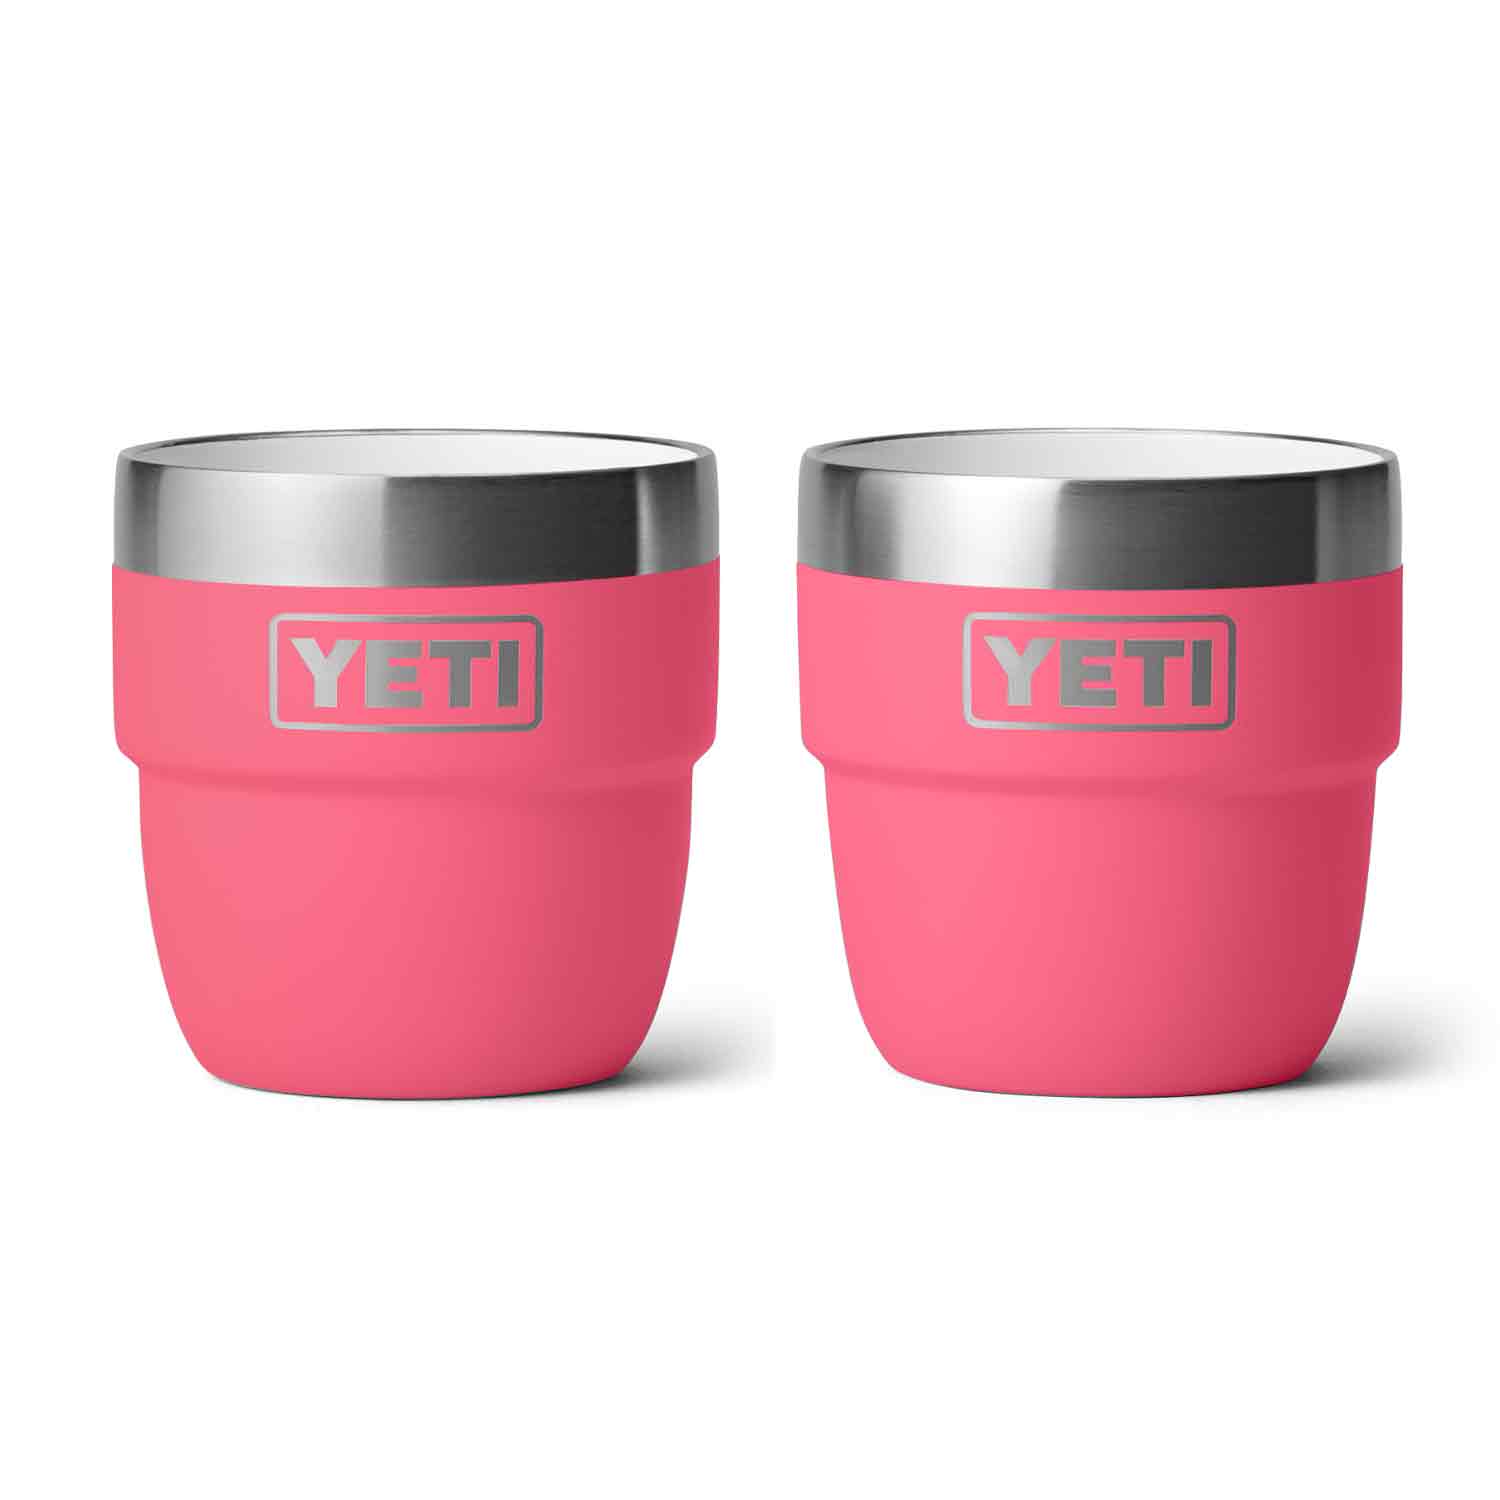 YETI Stackable Cup (2-pk)